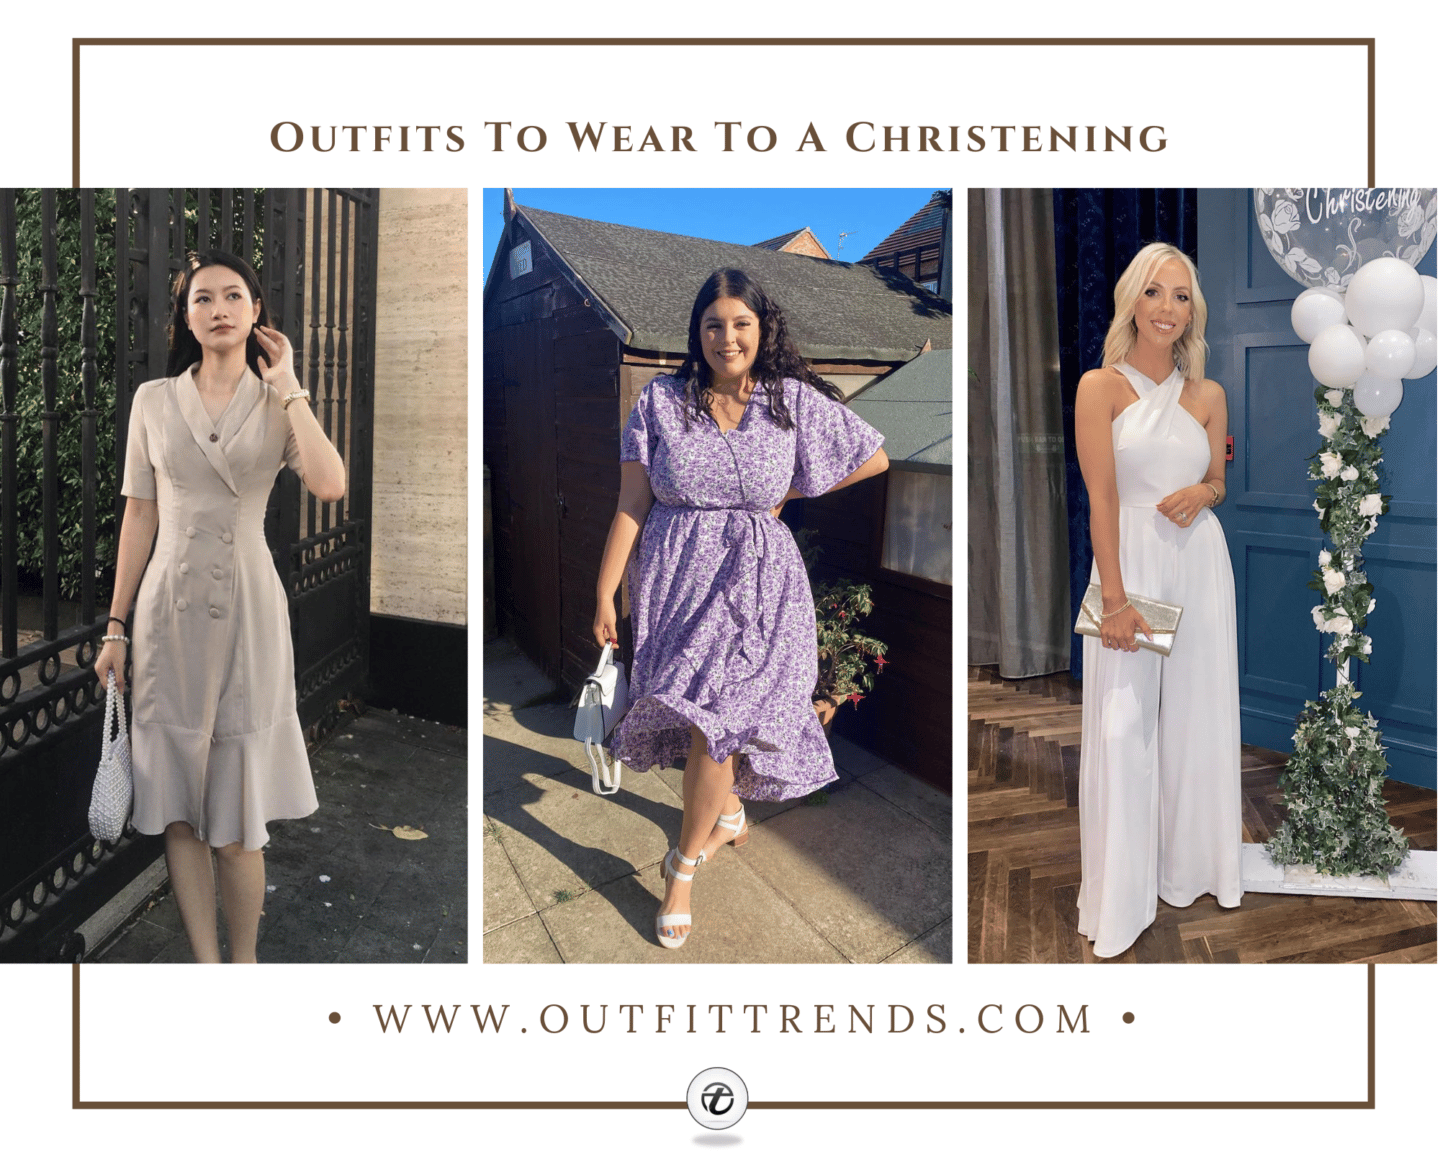 Christening Outfits – 20 Tips What to Wear to a Christening